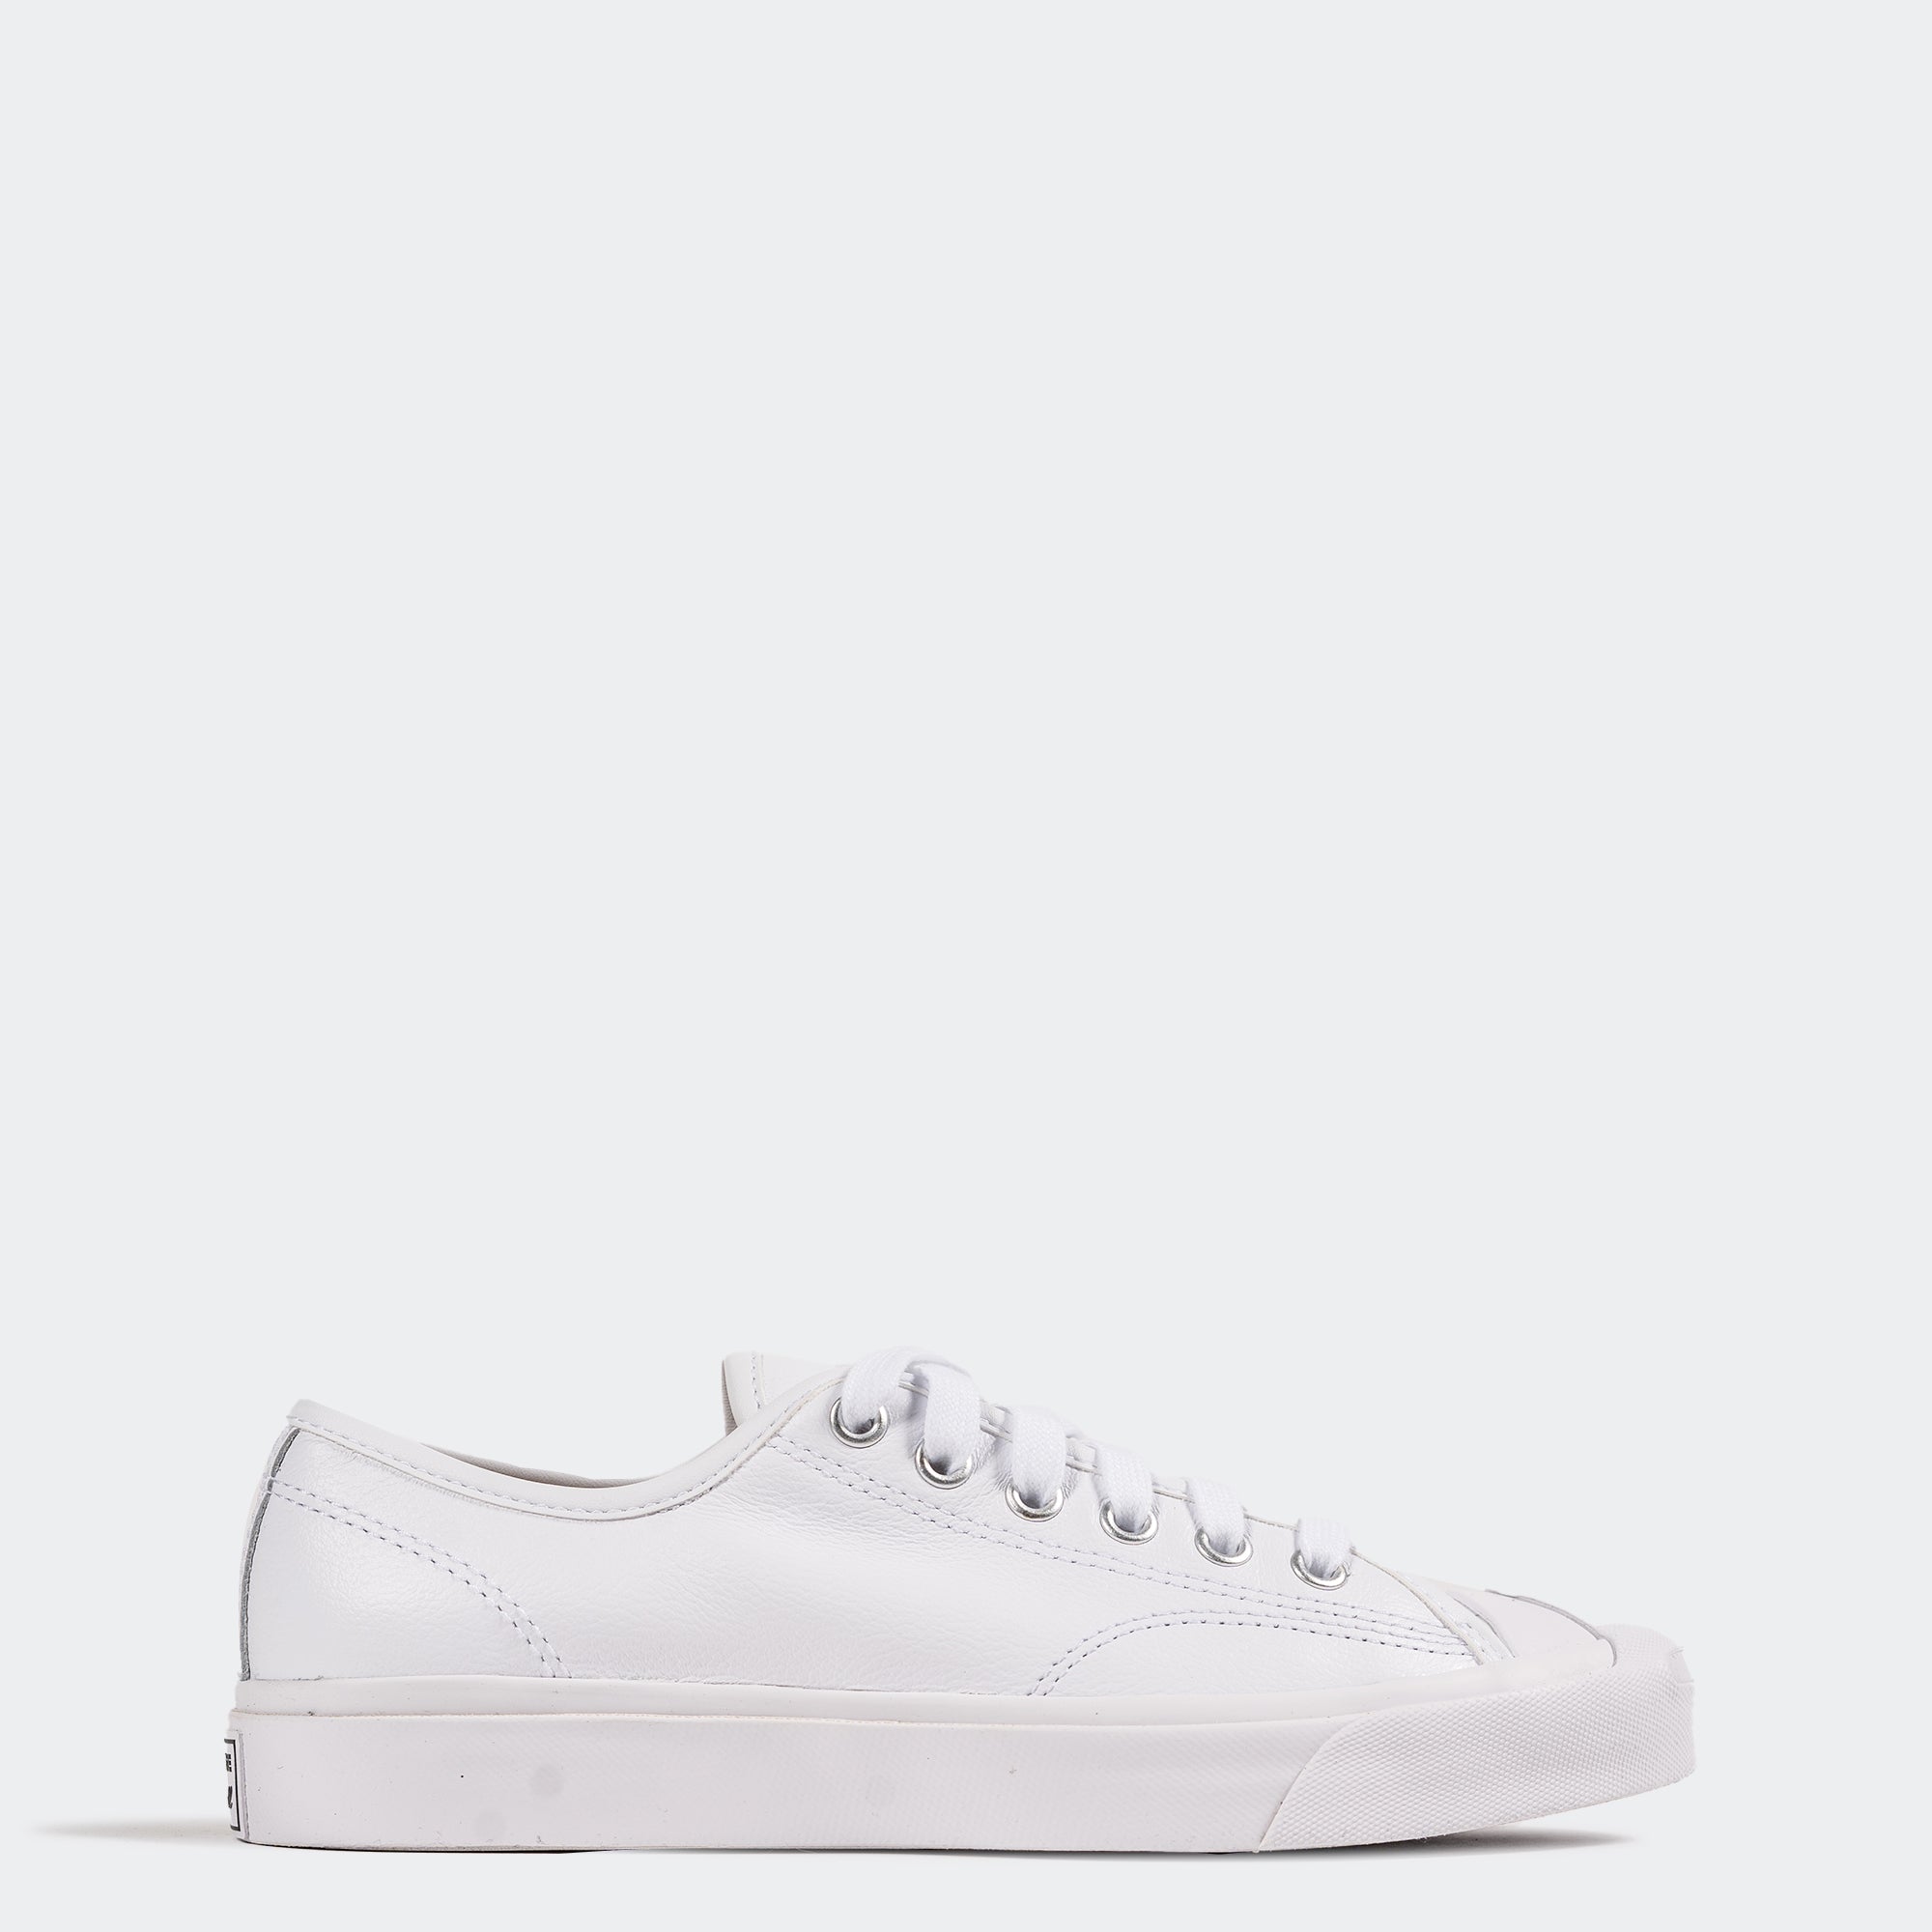 Verloren vermoeidheid rouw Unisex Converse Jack Purcell Leather Shoes White | Chicago City Sports